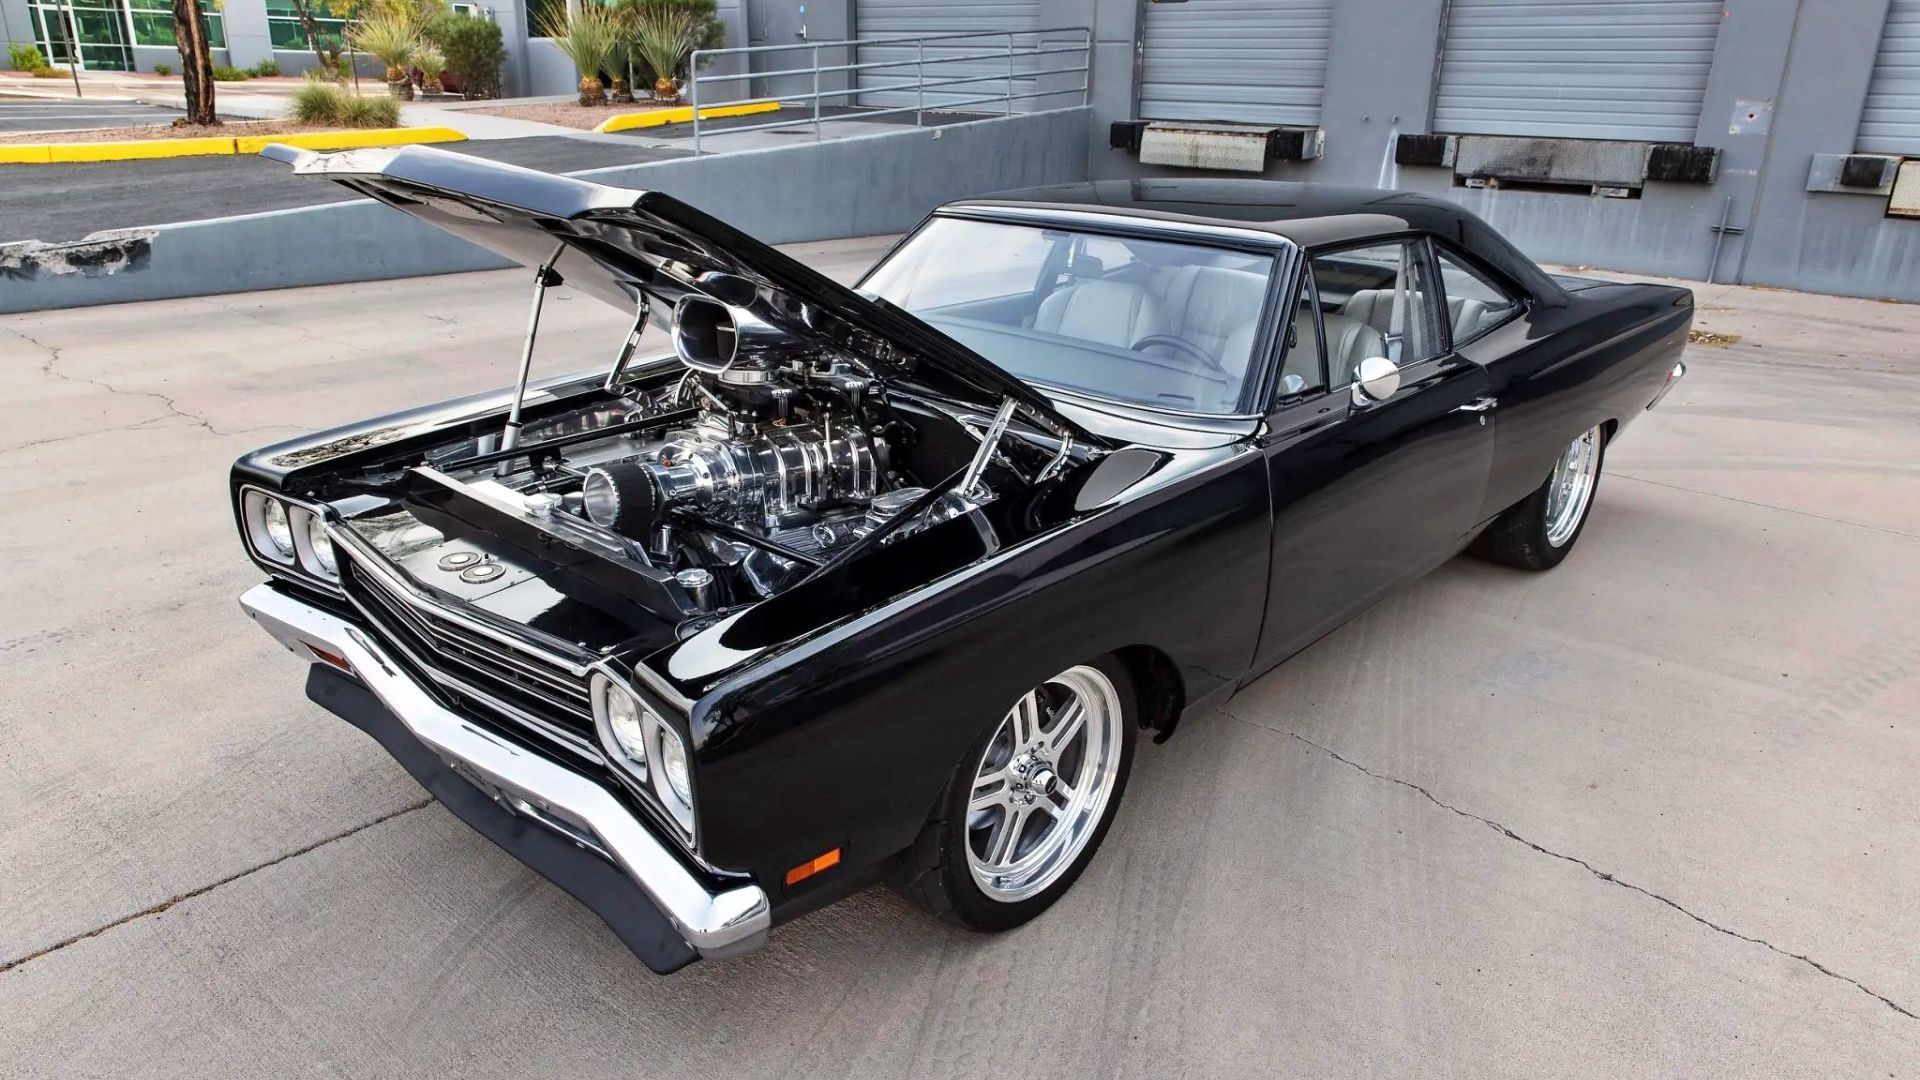 Hood Open Supercharged 1969 Plymouth Road Runner Black